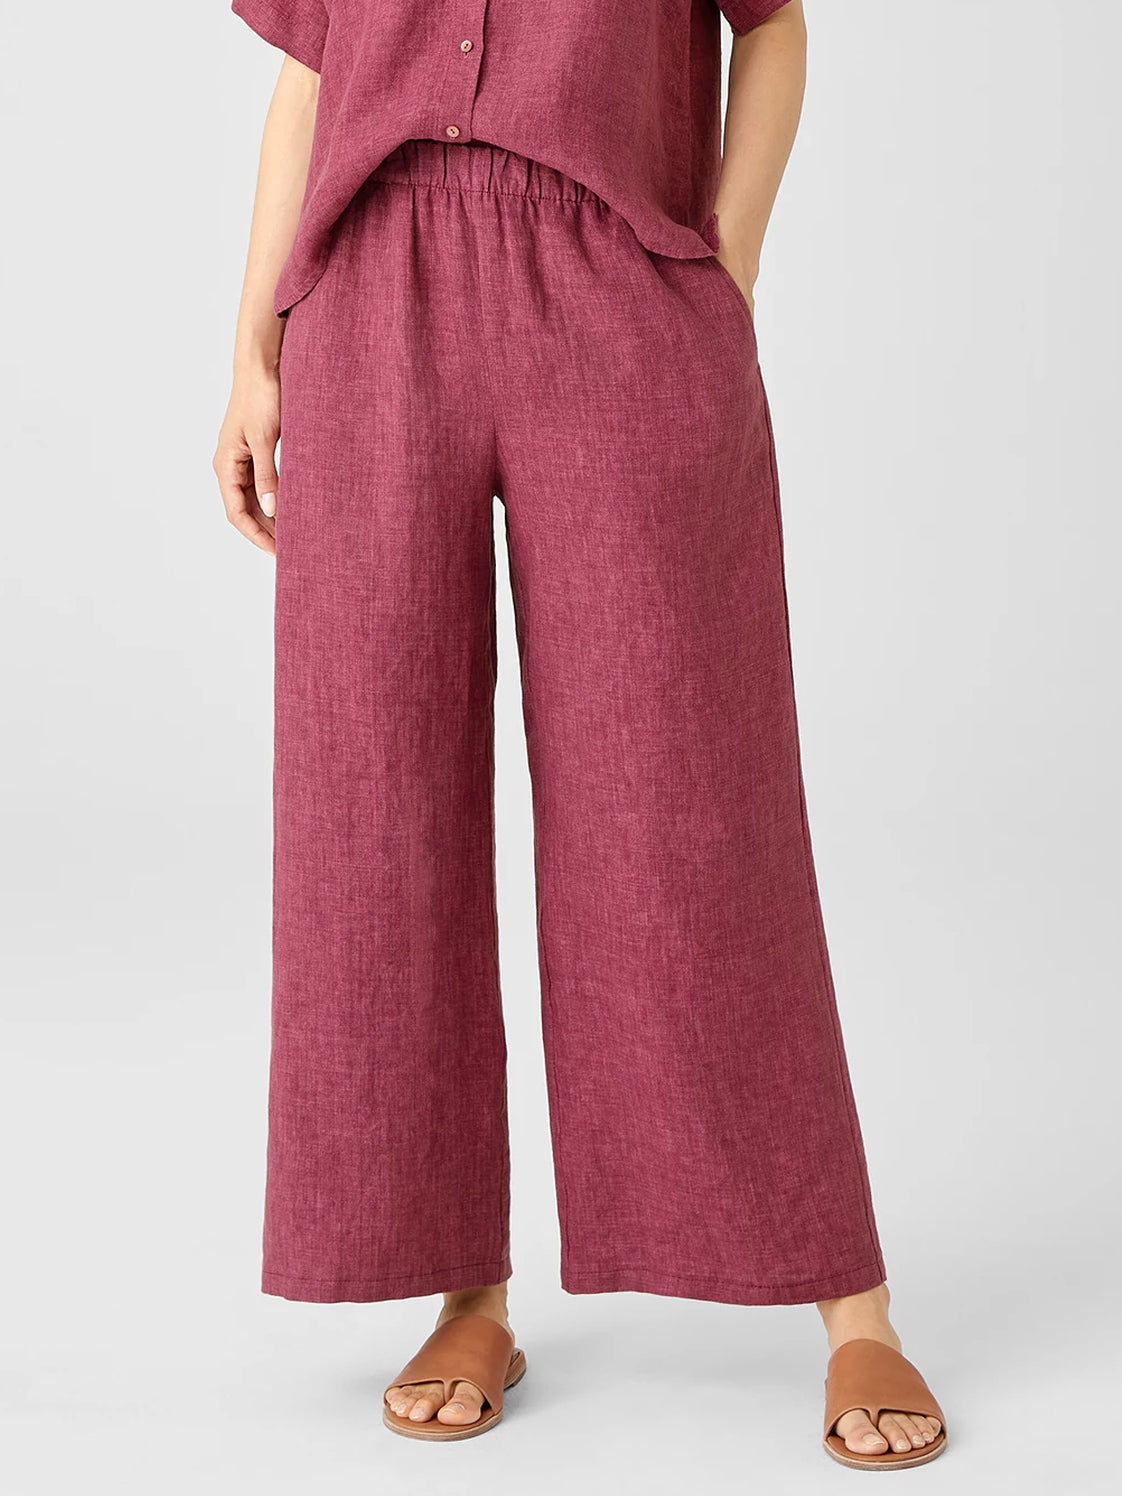 Classic Wide-Leg Casual Daytime Pant - boddysize